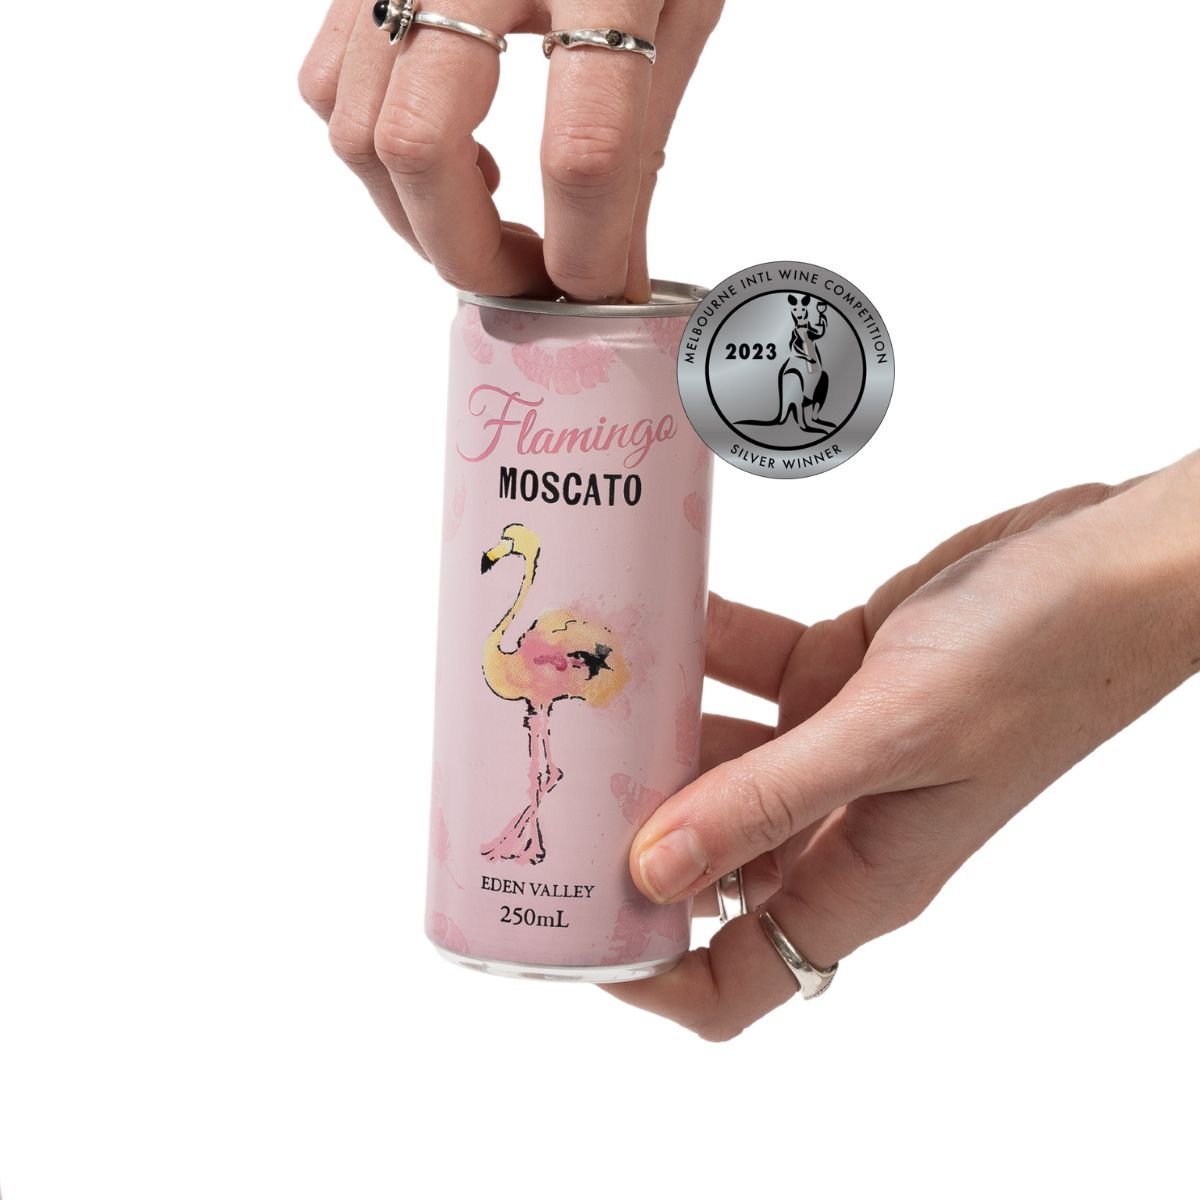 Flamingo Moscato 4 Pack Cans - Millon Wines